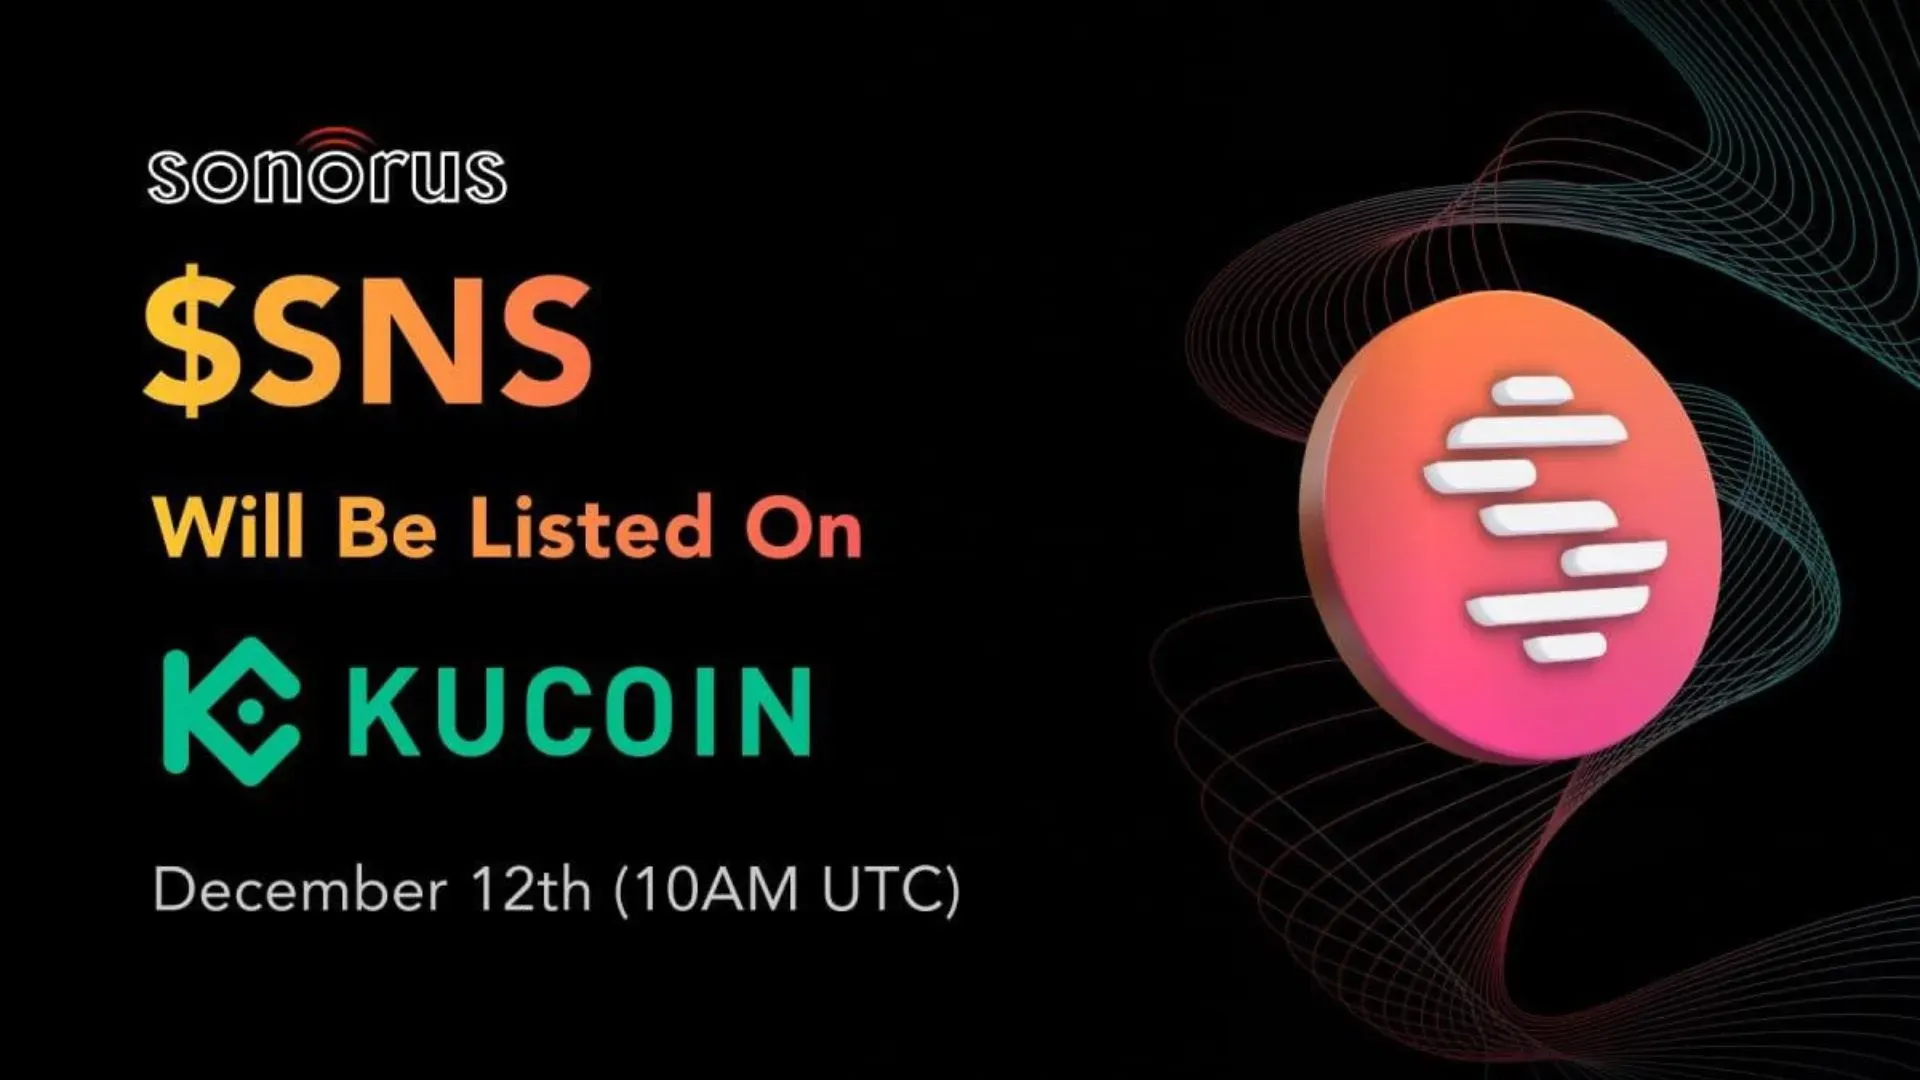 Sonorus's $SNS Token Debuts on Kucoin, Boosting Web3 Music